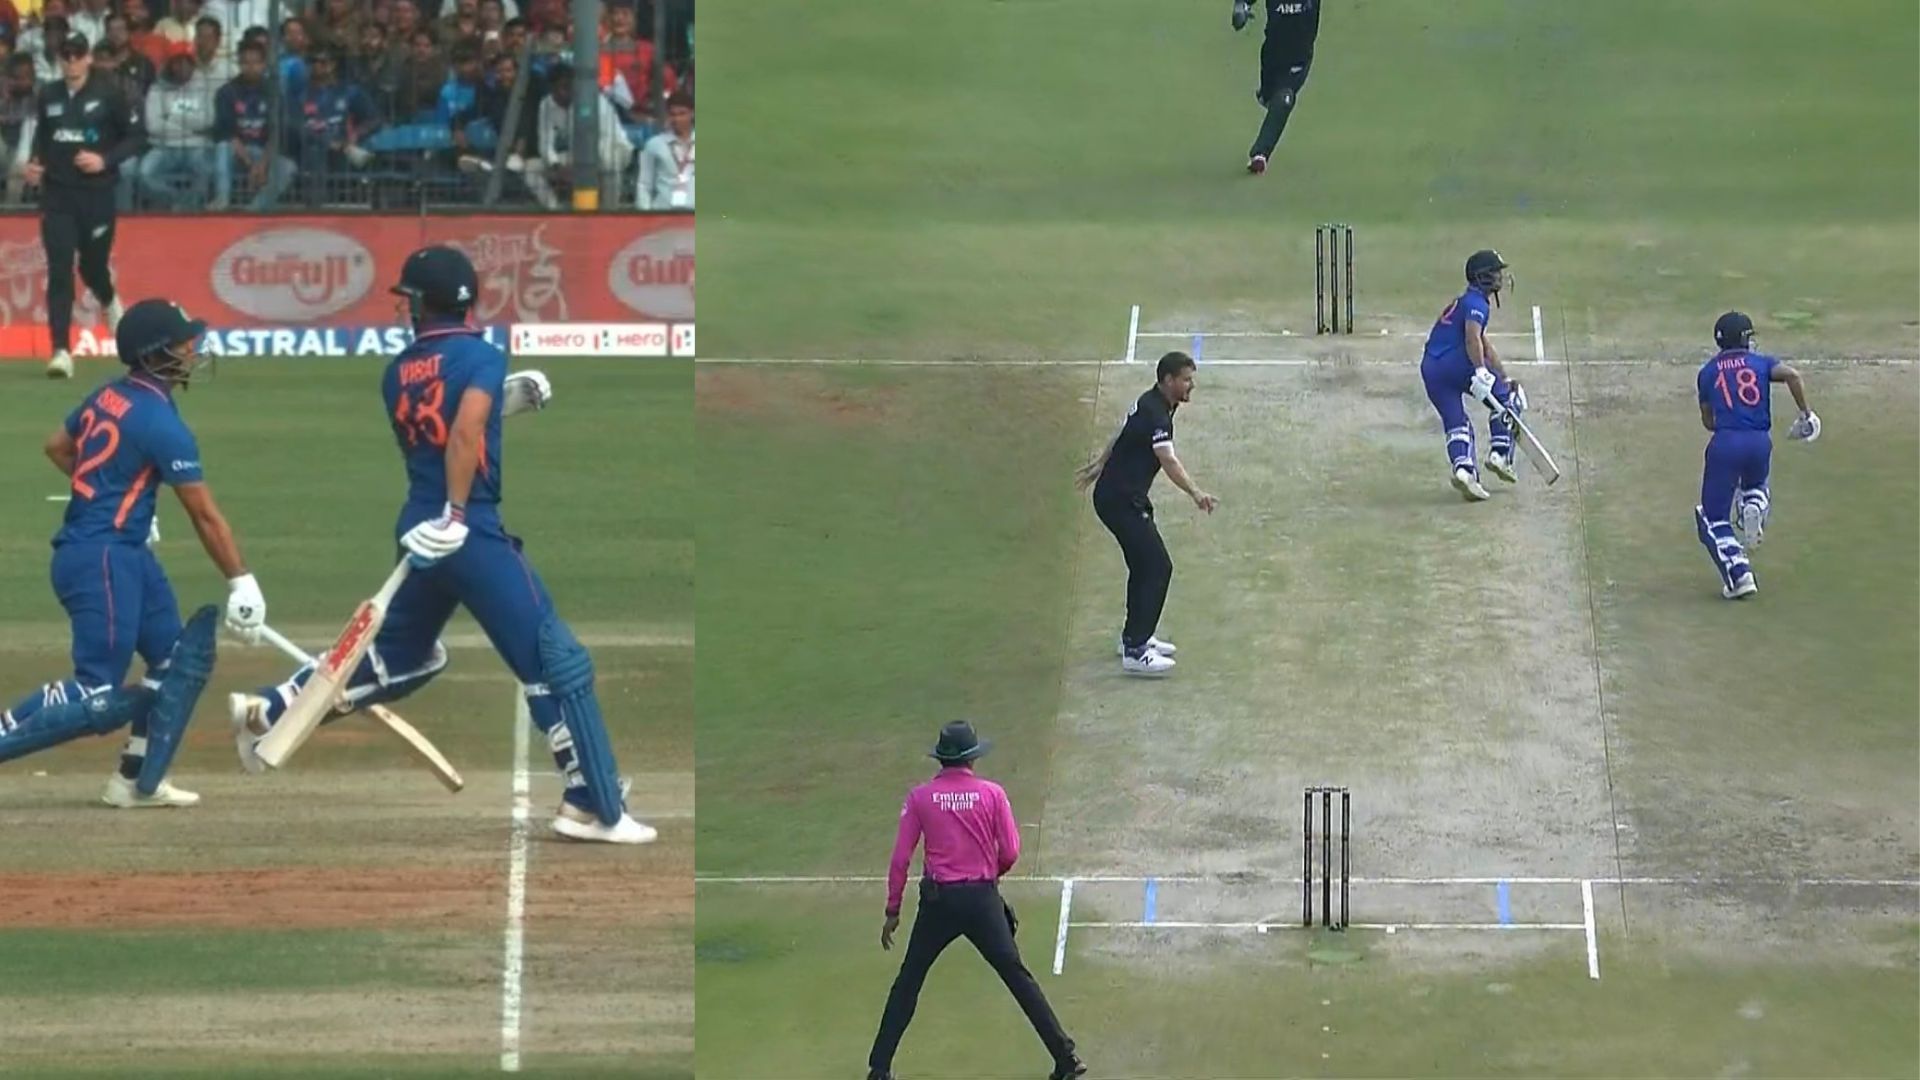 [WATCH] Ishan Kishan gets run-out after a huge mix-up with Virat Kohli on the pitch during third ODI against New Zealand 